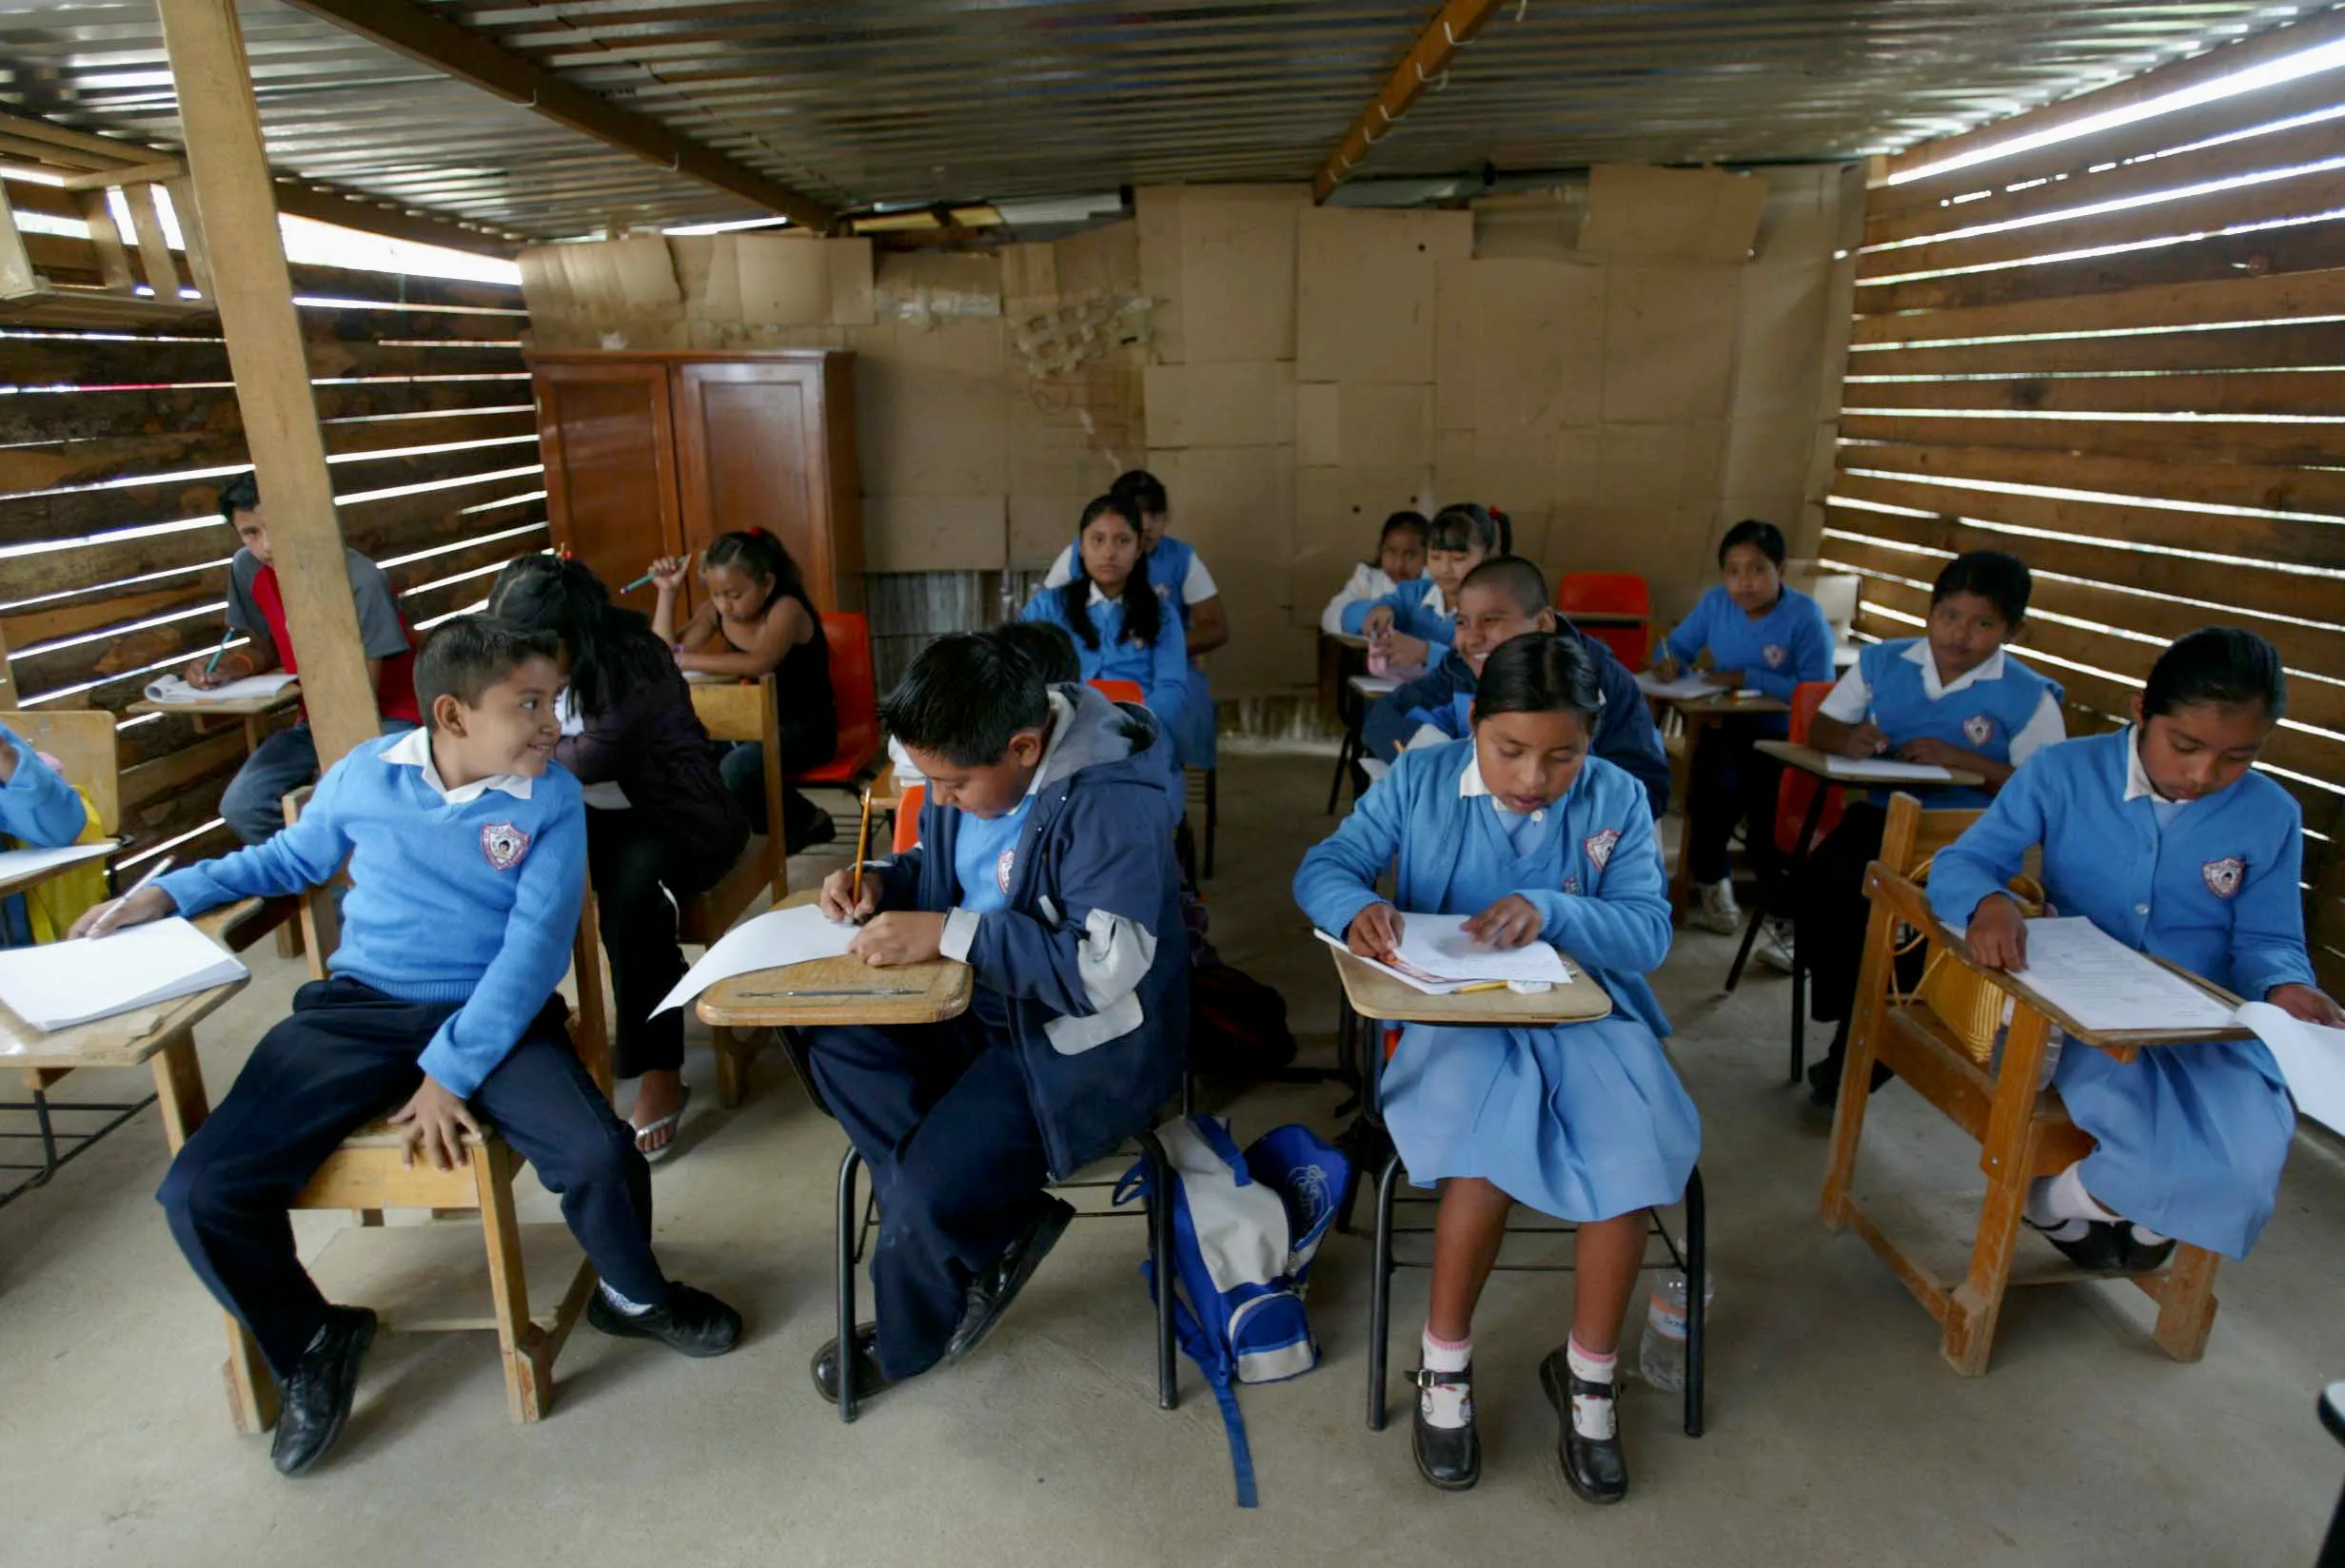 challenges in education in mexico